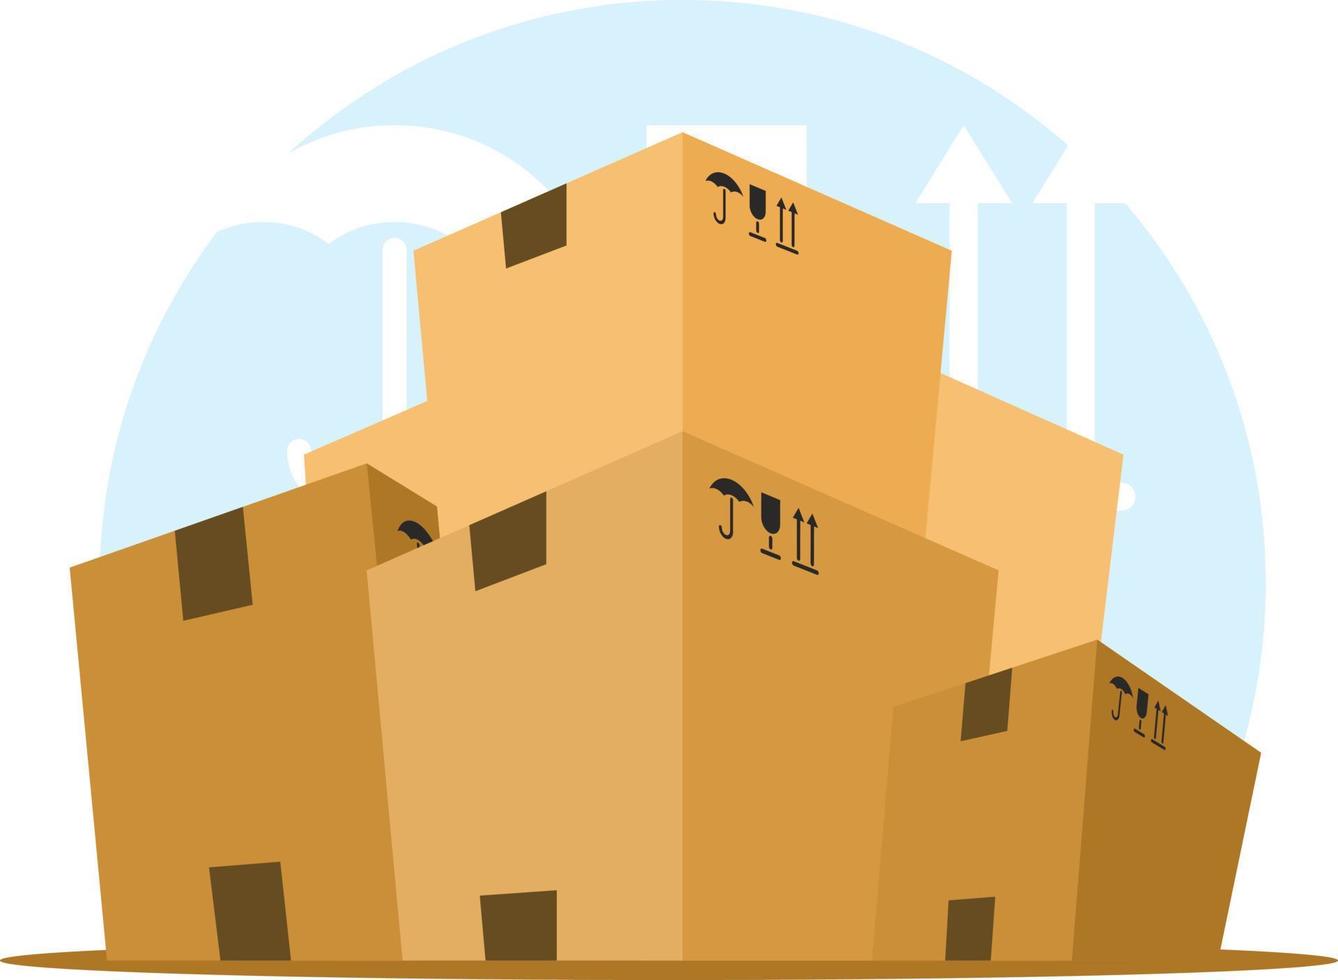 Vector Image Of A Pile Of Cardboard Boxes